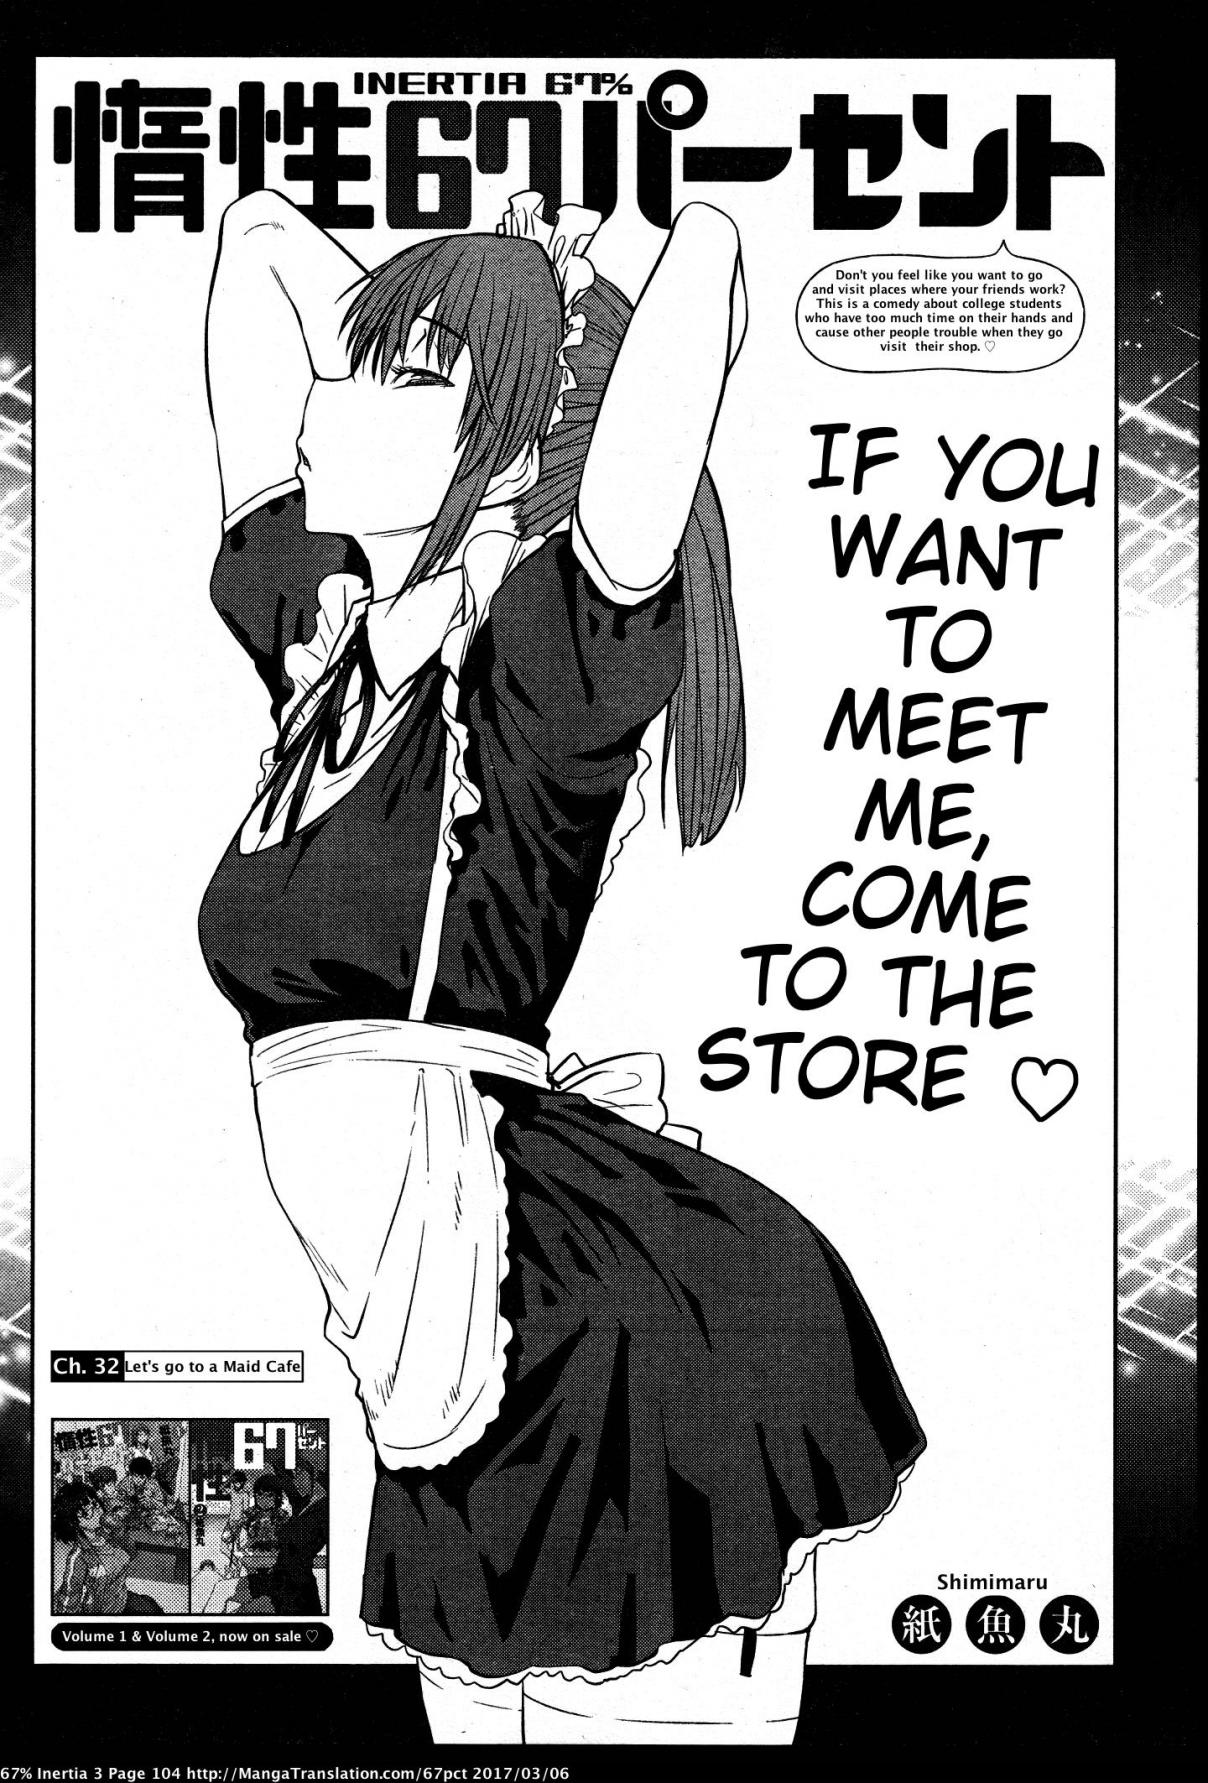 67% Inertia Vol. 3 Ch. 32 Let's go to a Maid Cafe